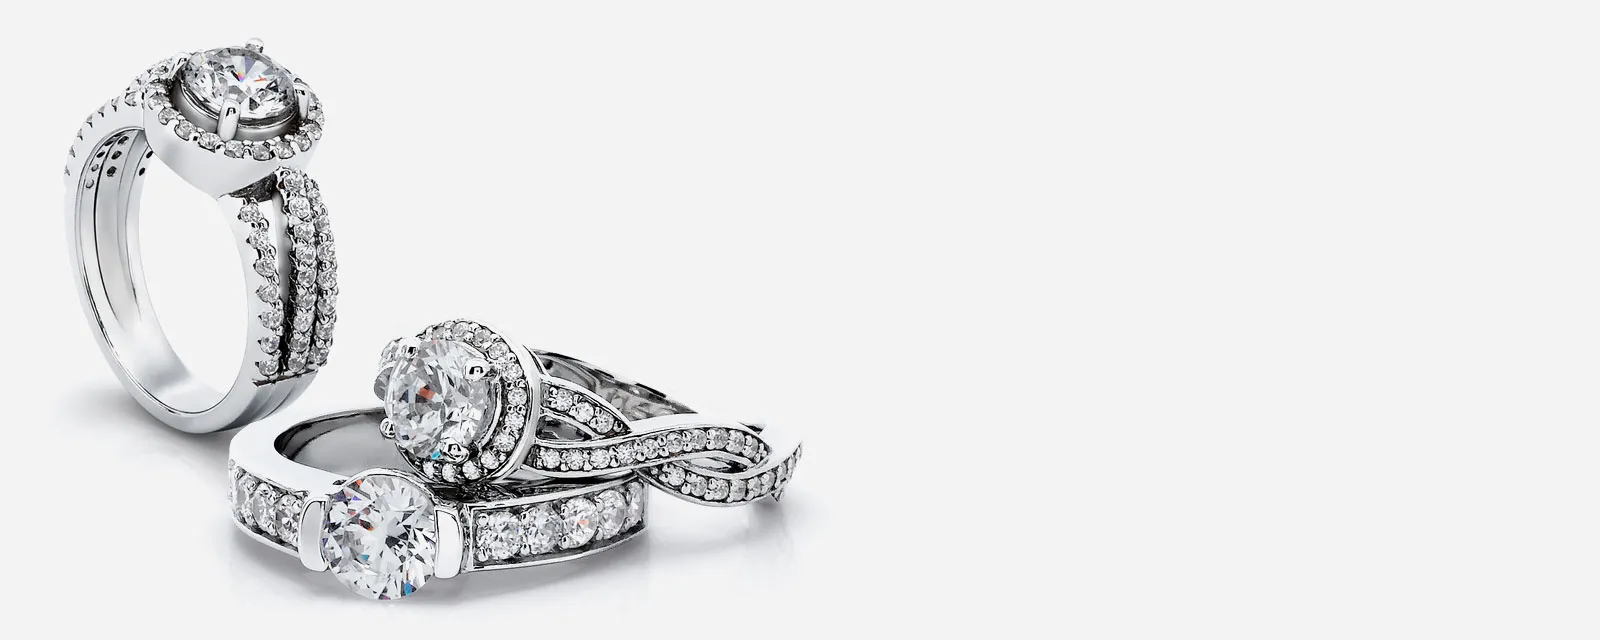 Create Your Own Engagement Ring Select your ring setting and pair it with your ideal diamond. Wallach Jewelry Designs Larchmont, NY